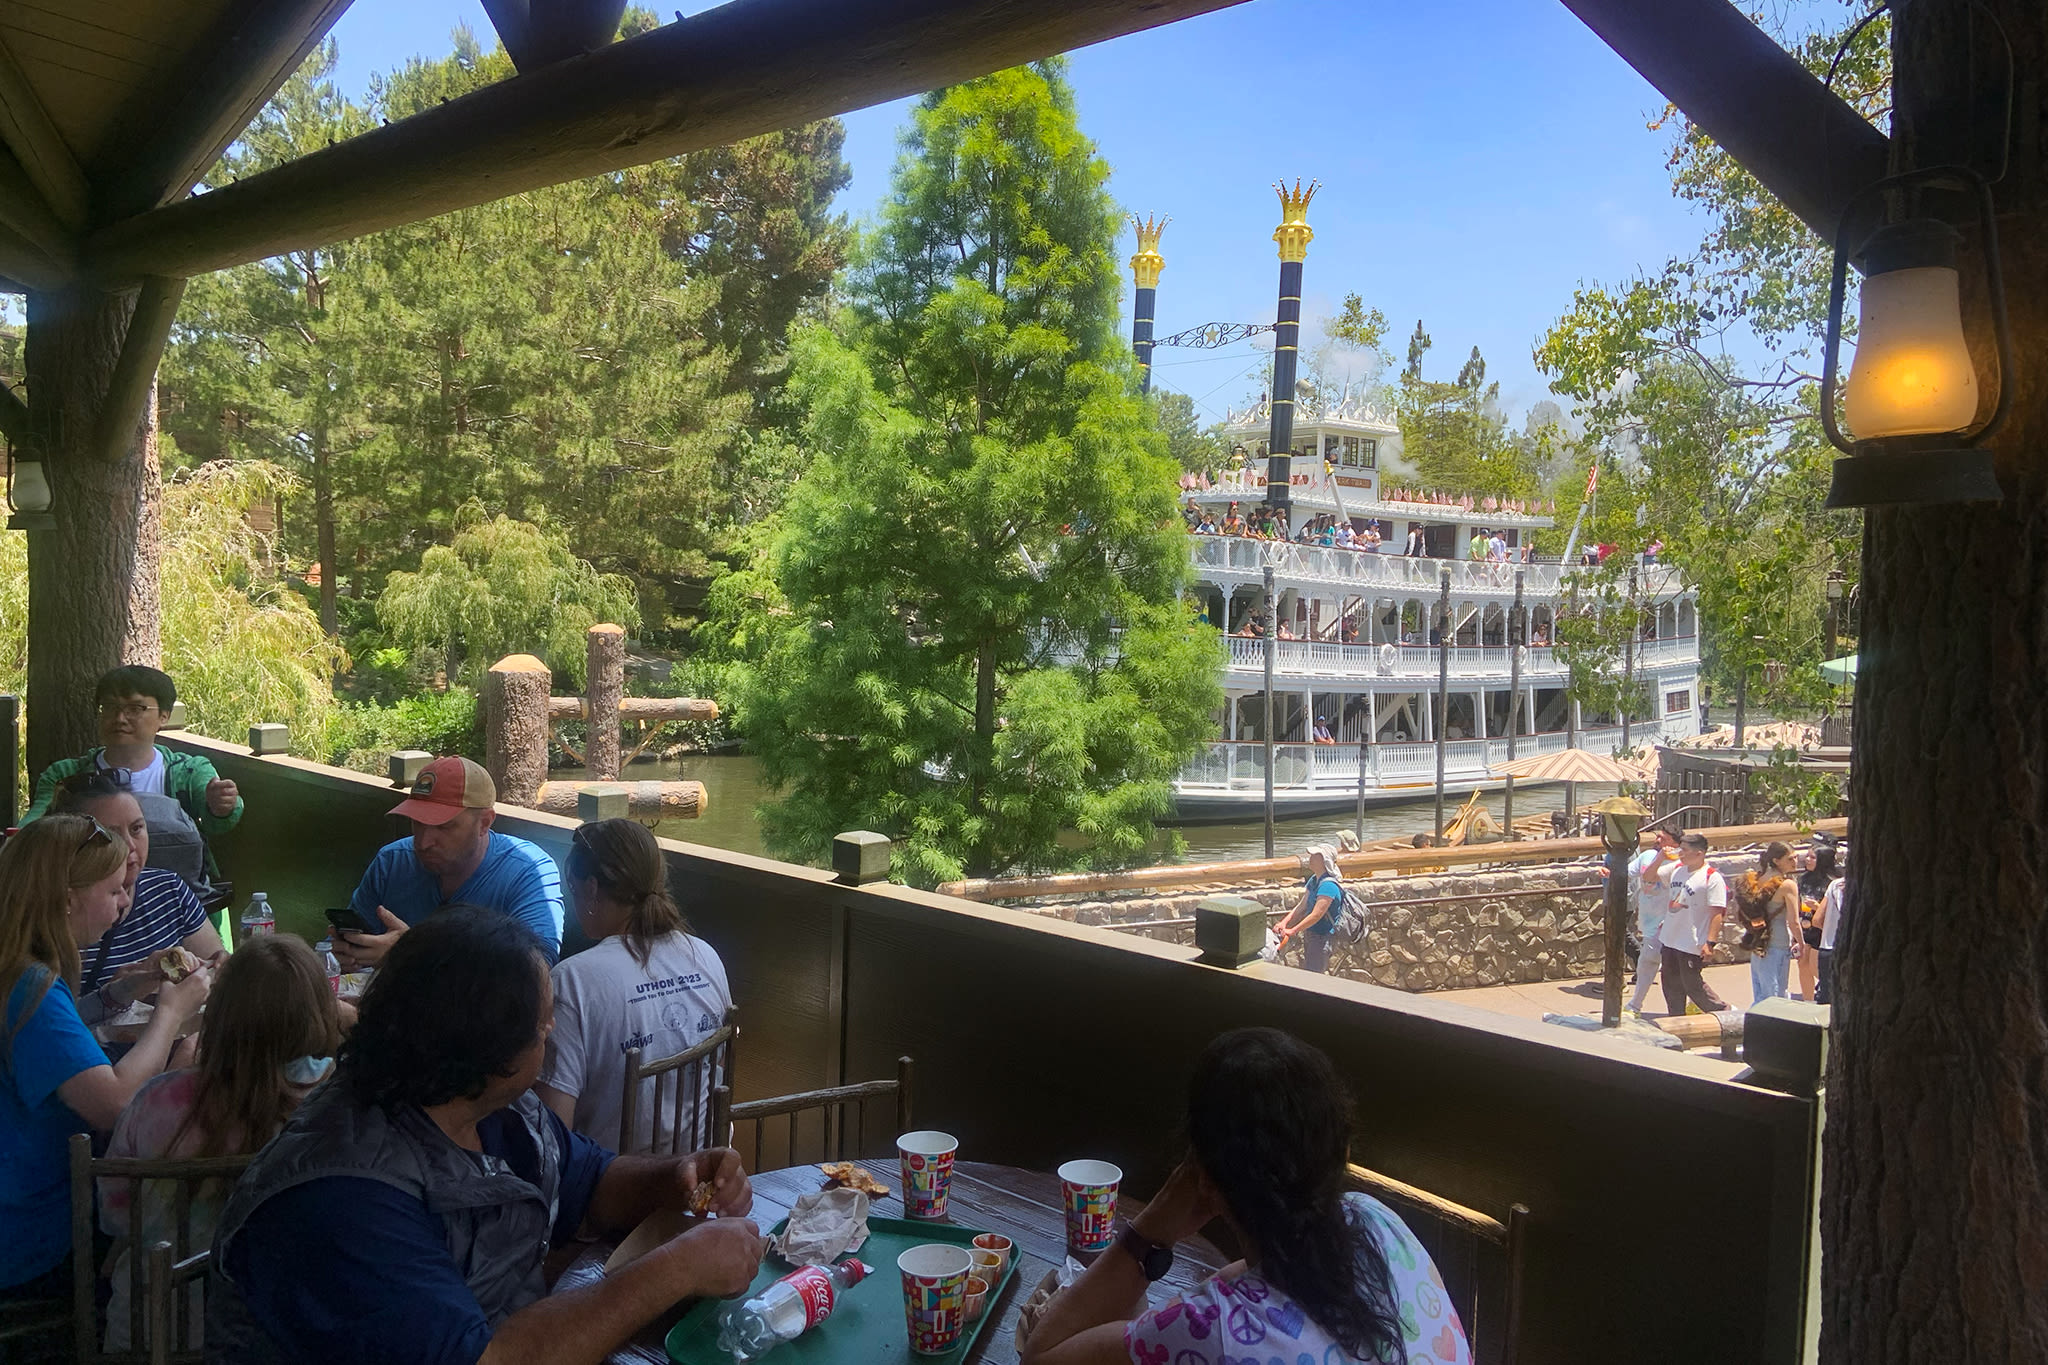 Why this forgettable Disneyland attraction could become a historic landmark